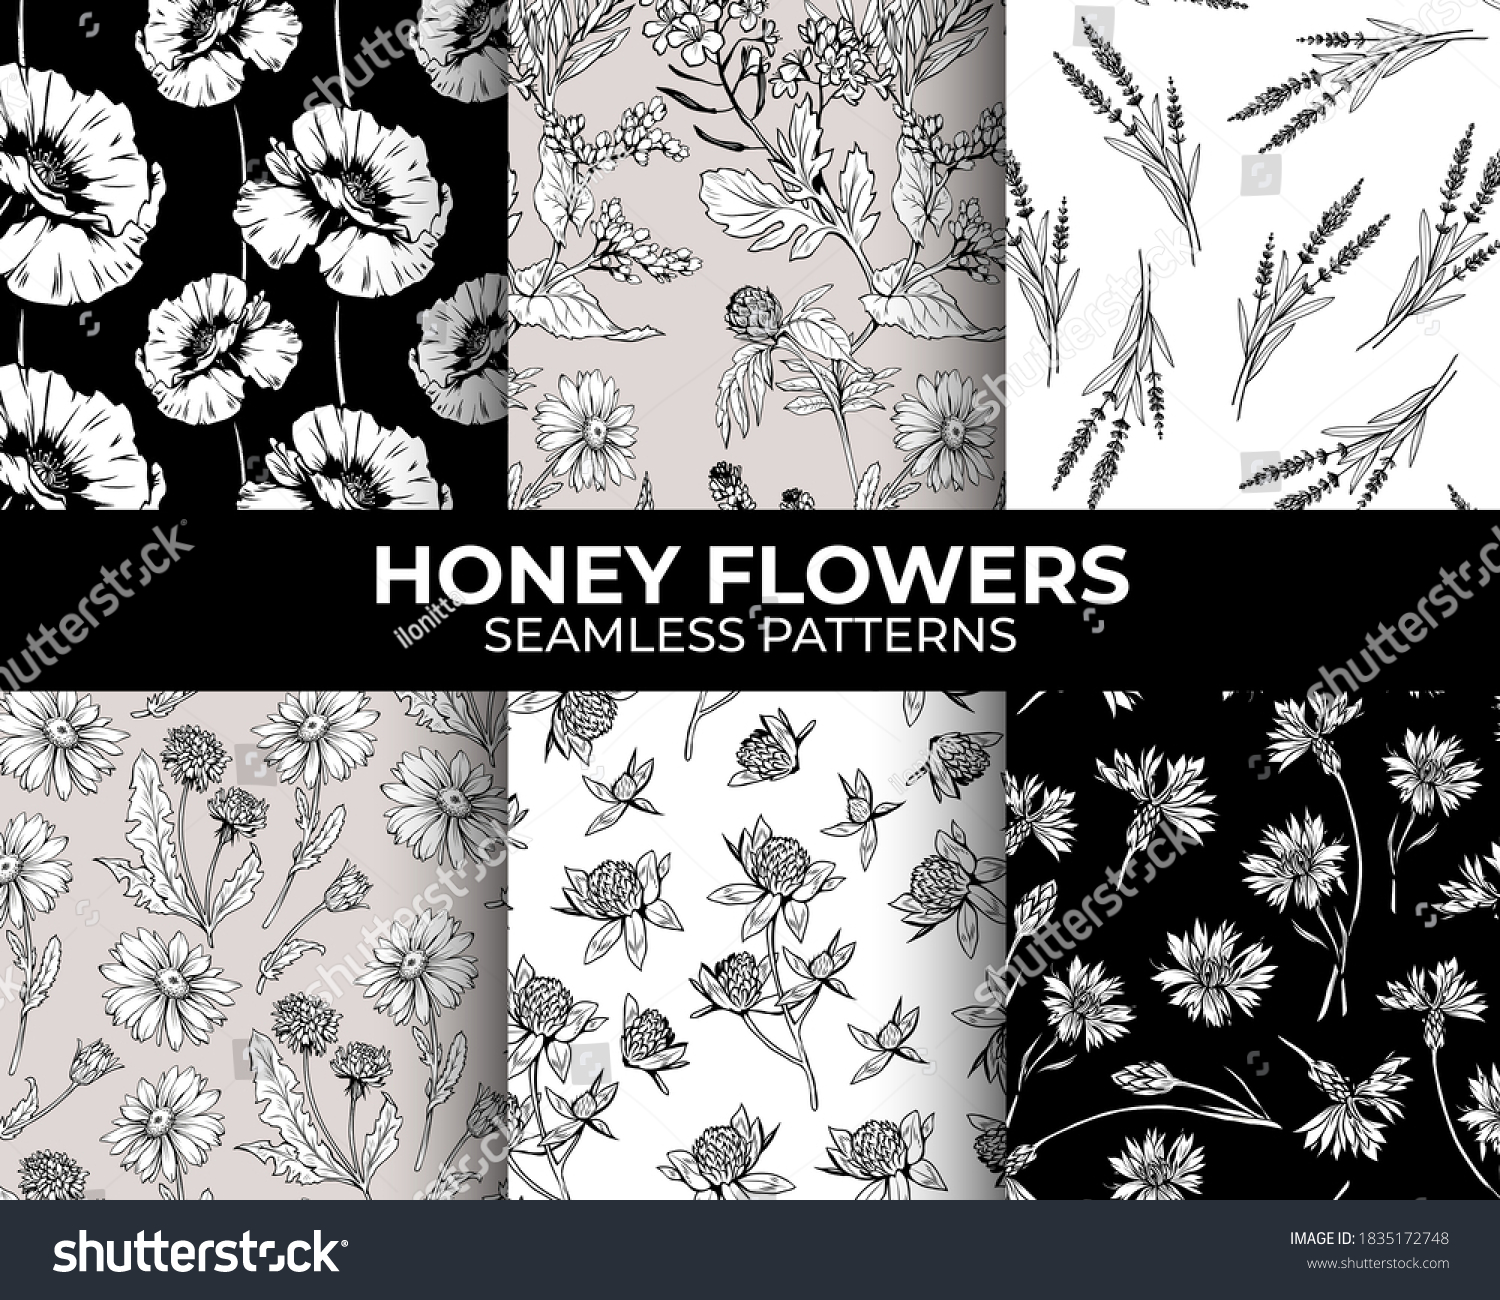 SVG of Honey flowers modern seamless patterns collection for fabric textile design and sublimation. Line art graphic. svg